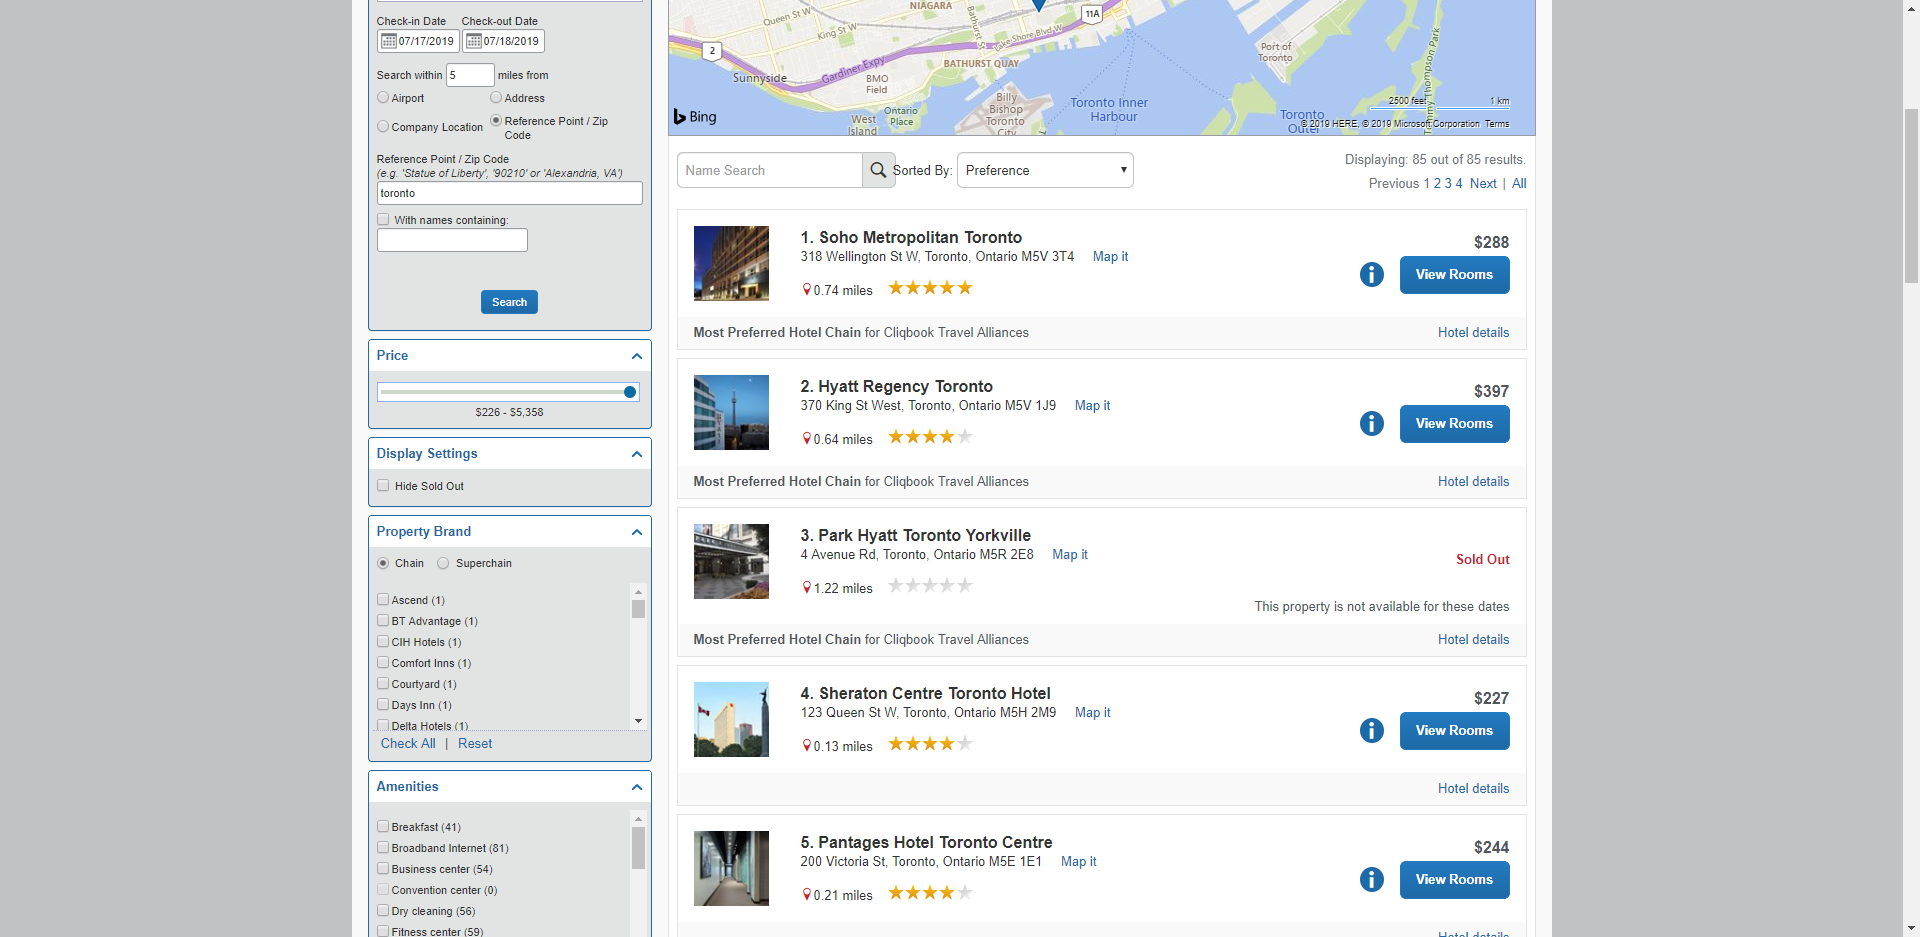 Concur_-_Toronto_Search_Results_2.png